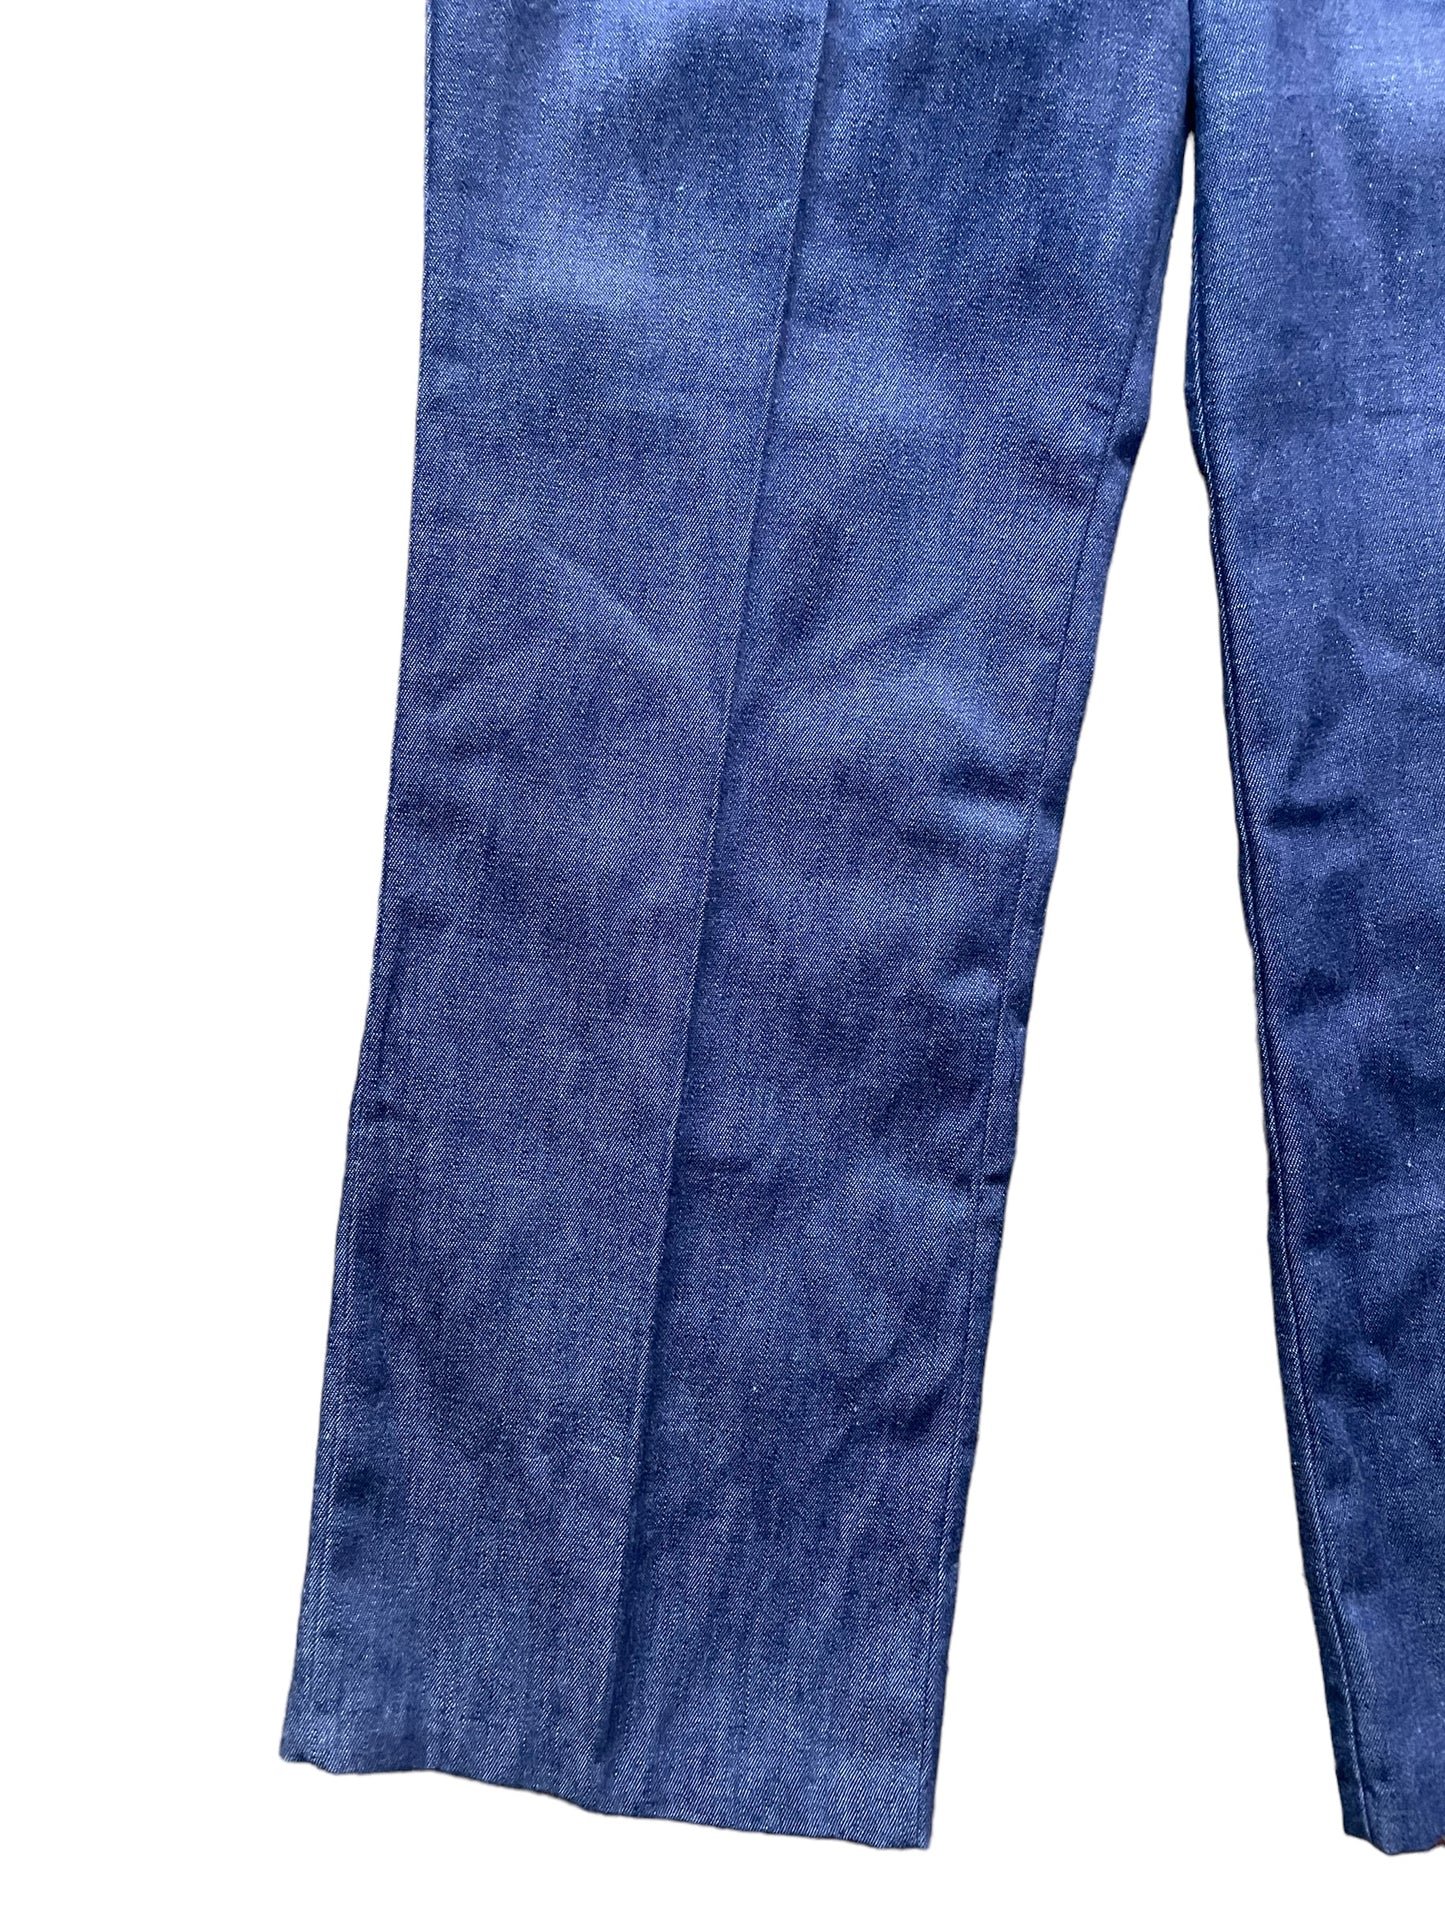 Front right leg view of Vintage 1970s Mork and Mindy Denim Trousers W32 | Barn Owl Vintage Seattle | Vintage Denim